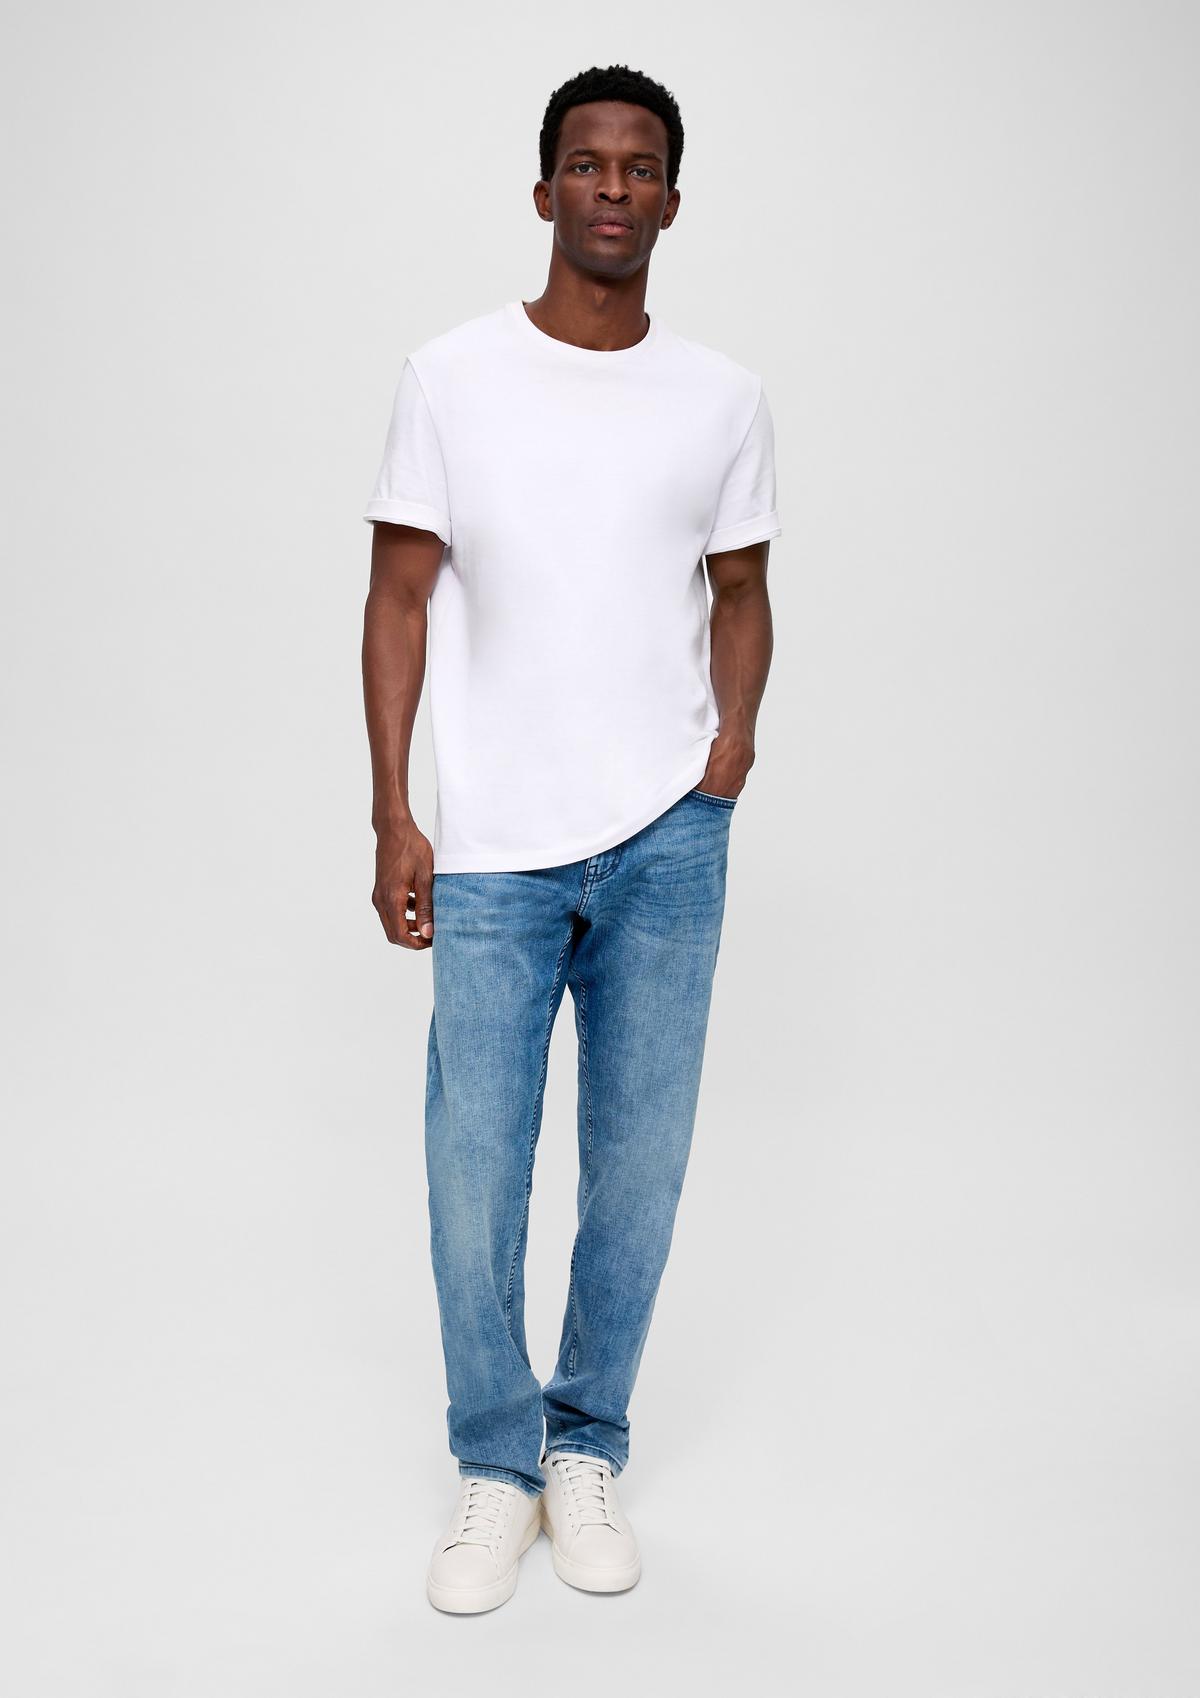 s.Oliver Mauro Jeans / Regular Fit / High Rise / Tapered Leg / Stretch Cotton